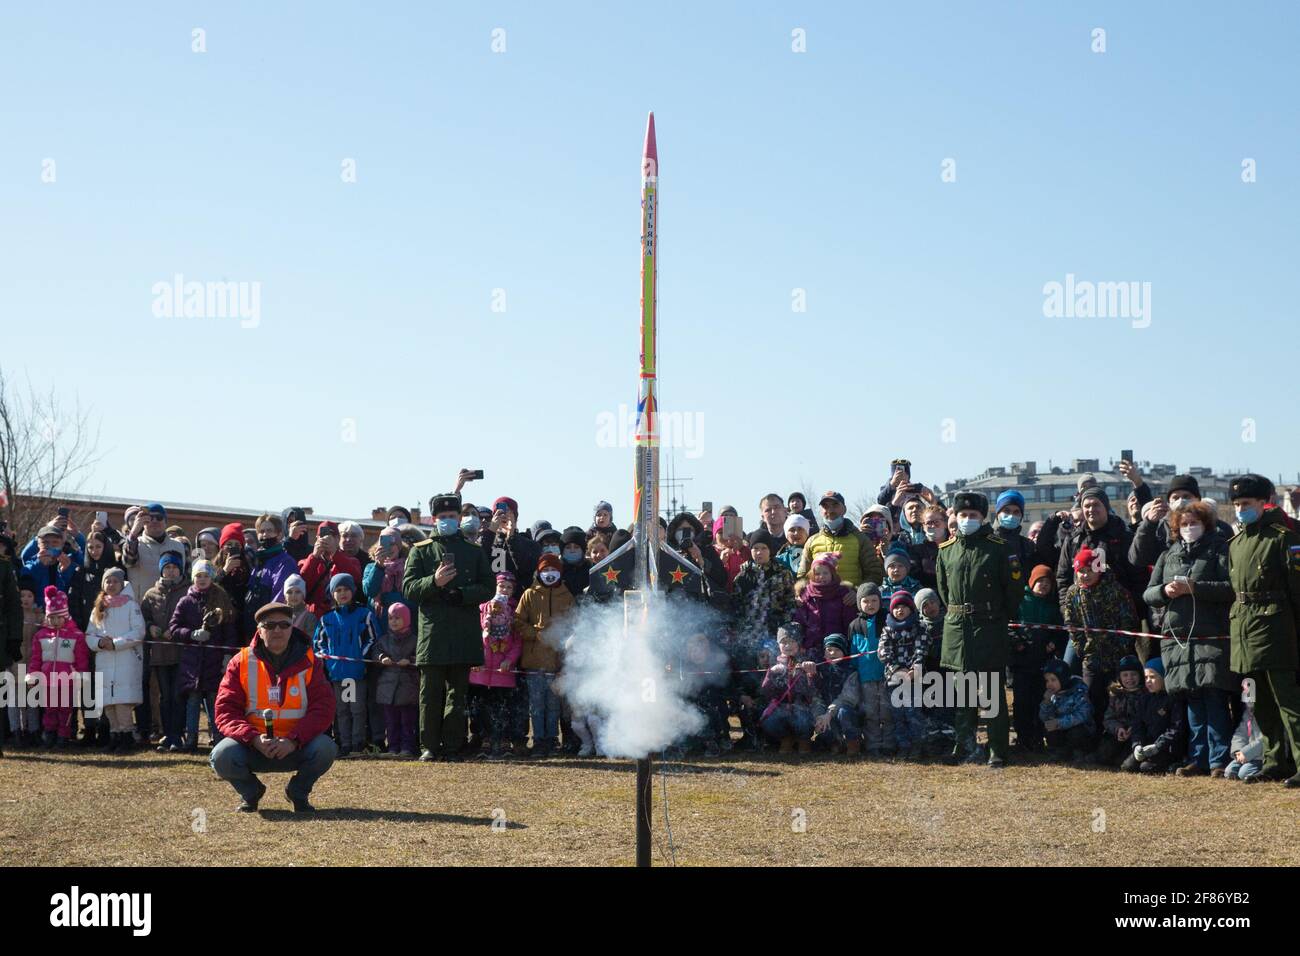 St. Petersburg, Russia. 11th Apr, 2021. Rocket enthusiasts witness the launching of a rocket model in commemoration of the 60th anniversary of the first human space flight in St. Petersburg, Russia, April 11, 2021. Credit: Irina Motina/Xinhua/Alamy Live News Stock Photo